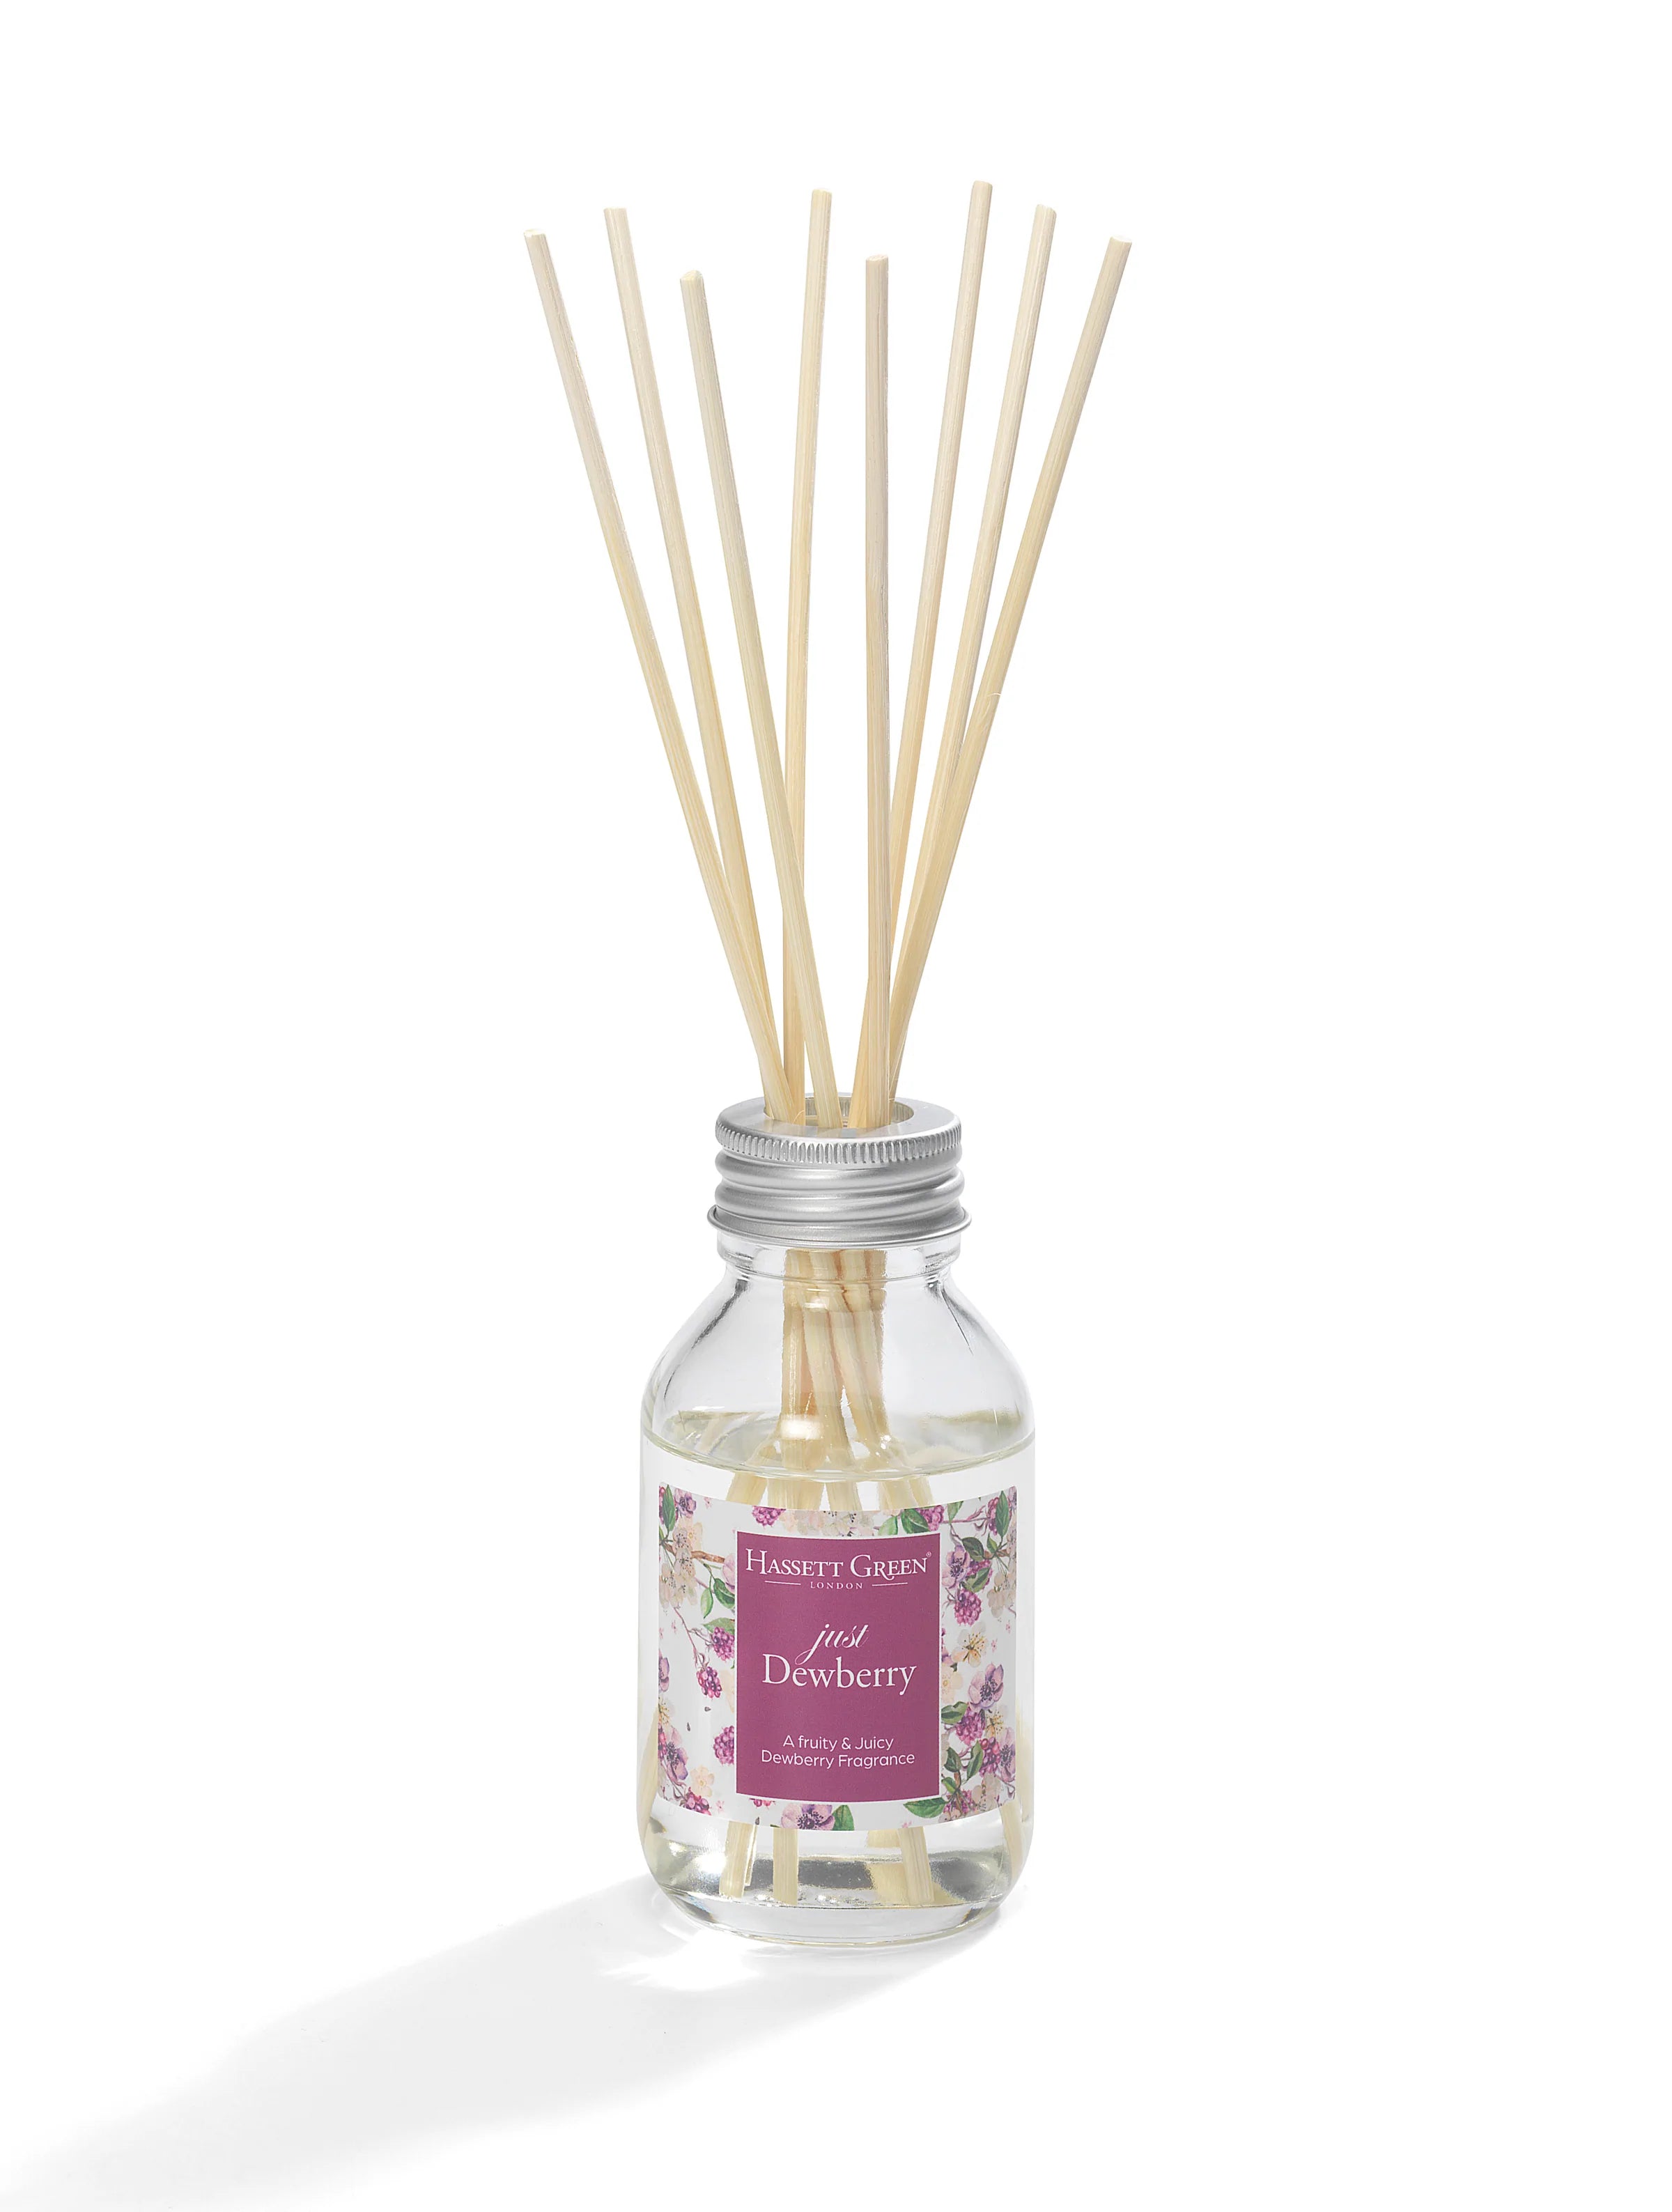 Hassett Green Just Dewberry - Turare Reed Diffuser 100ml